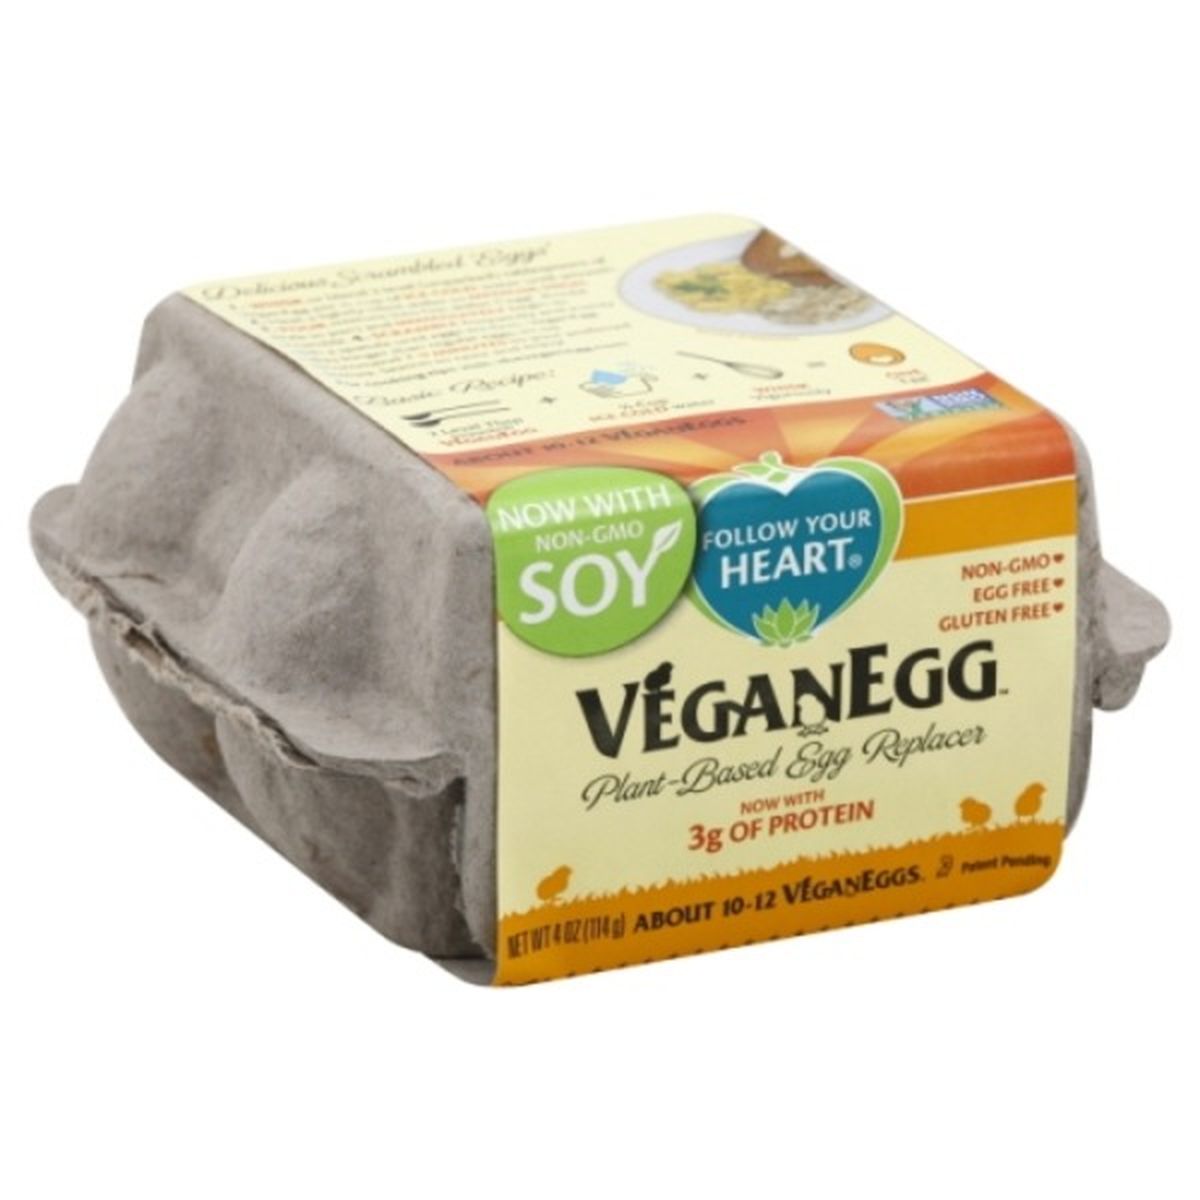 Calories in Follow Your Heart VeganEgg Egg Replacer, Plant-Based